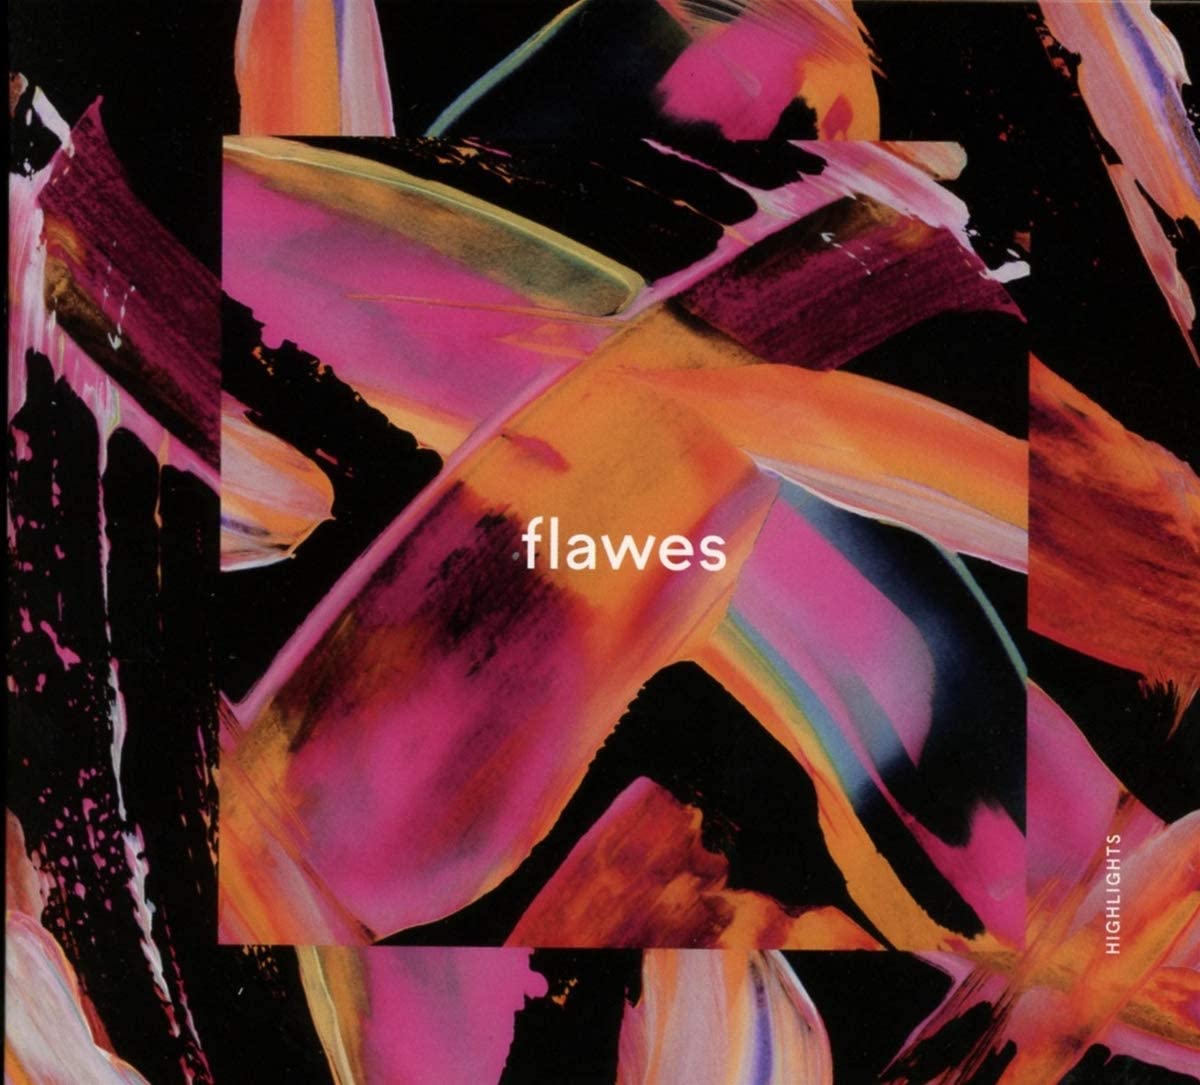 29. Highlights - Flawes.Another band I had never heard of that got recommend to me & I'm so glad I gave them a listen. They remind me of Fickle Friends, who I also love. Best tracks:Look No FurtherHere To StayDon't Count Me OutStill Not Ready @Flawes